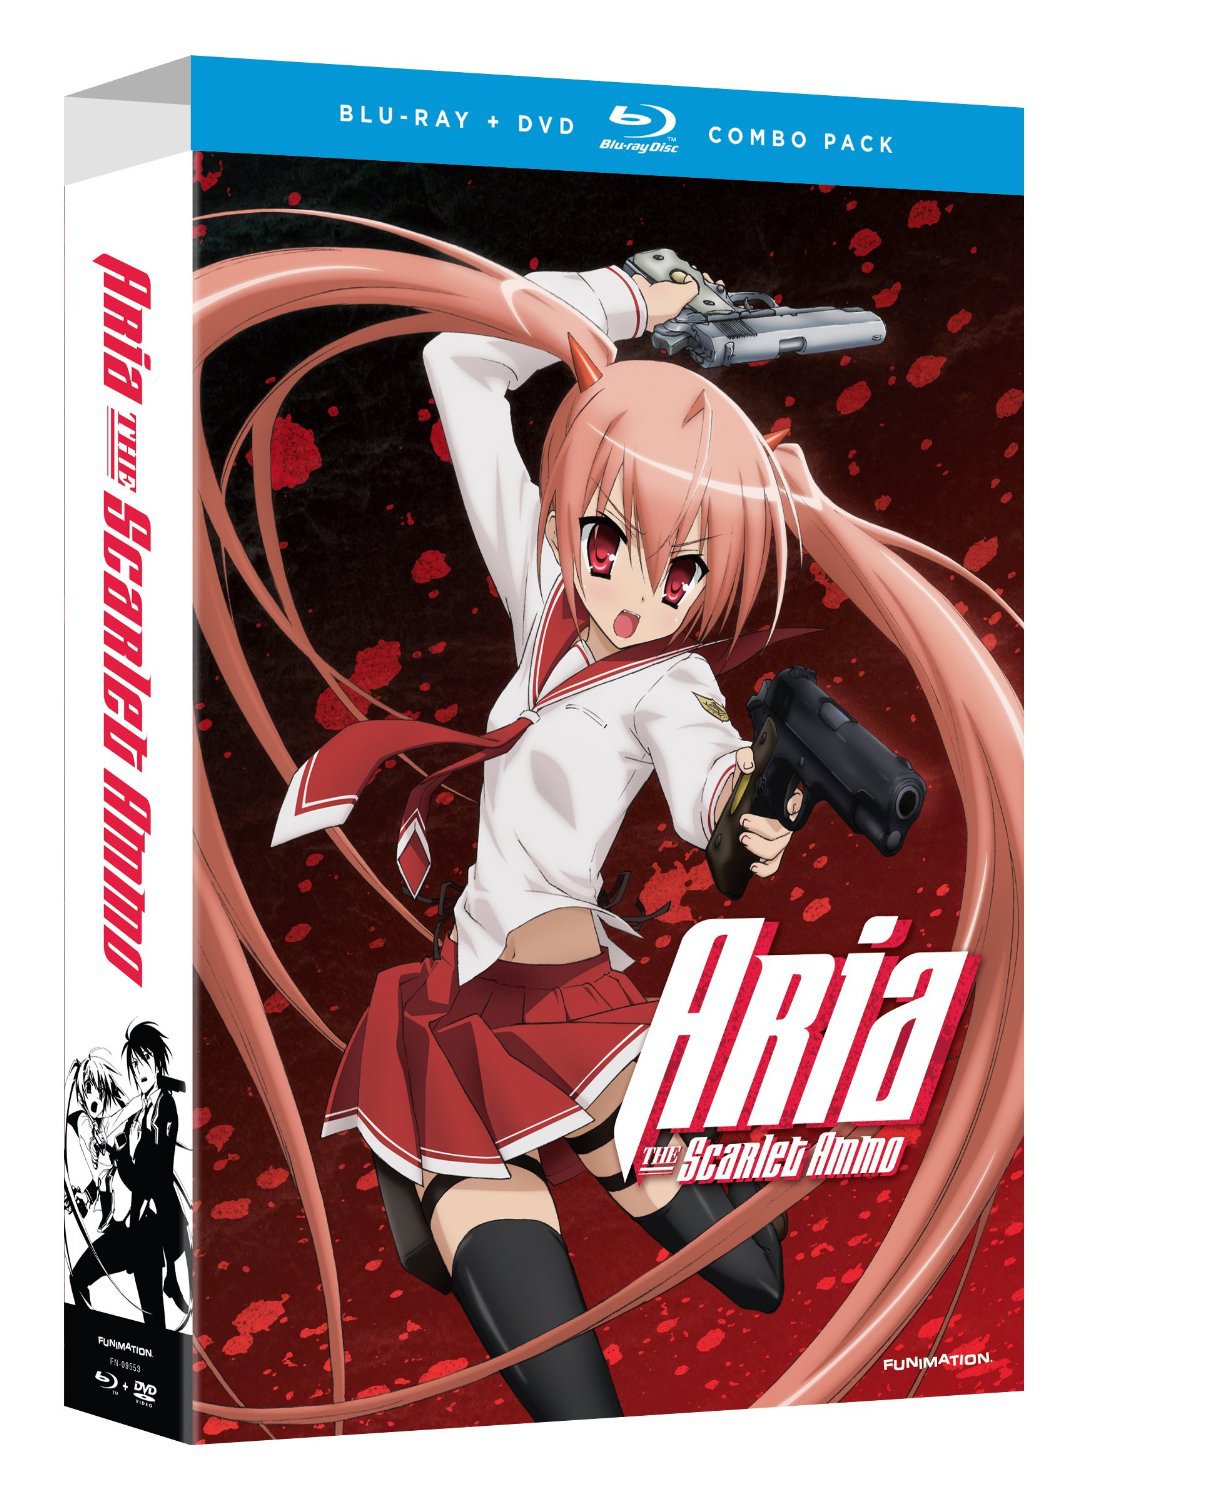 Aria: The Scarlet Ammo